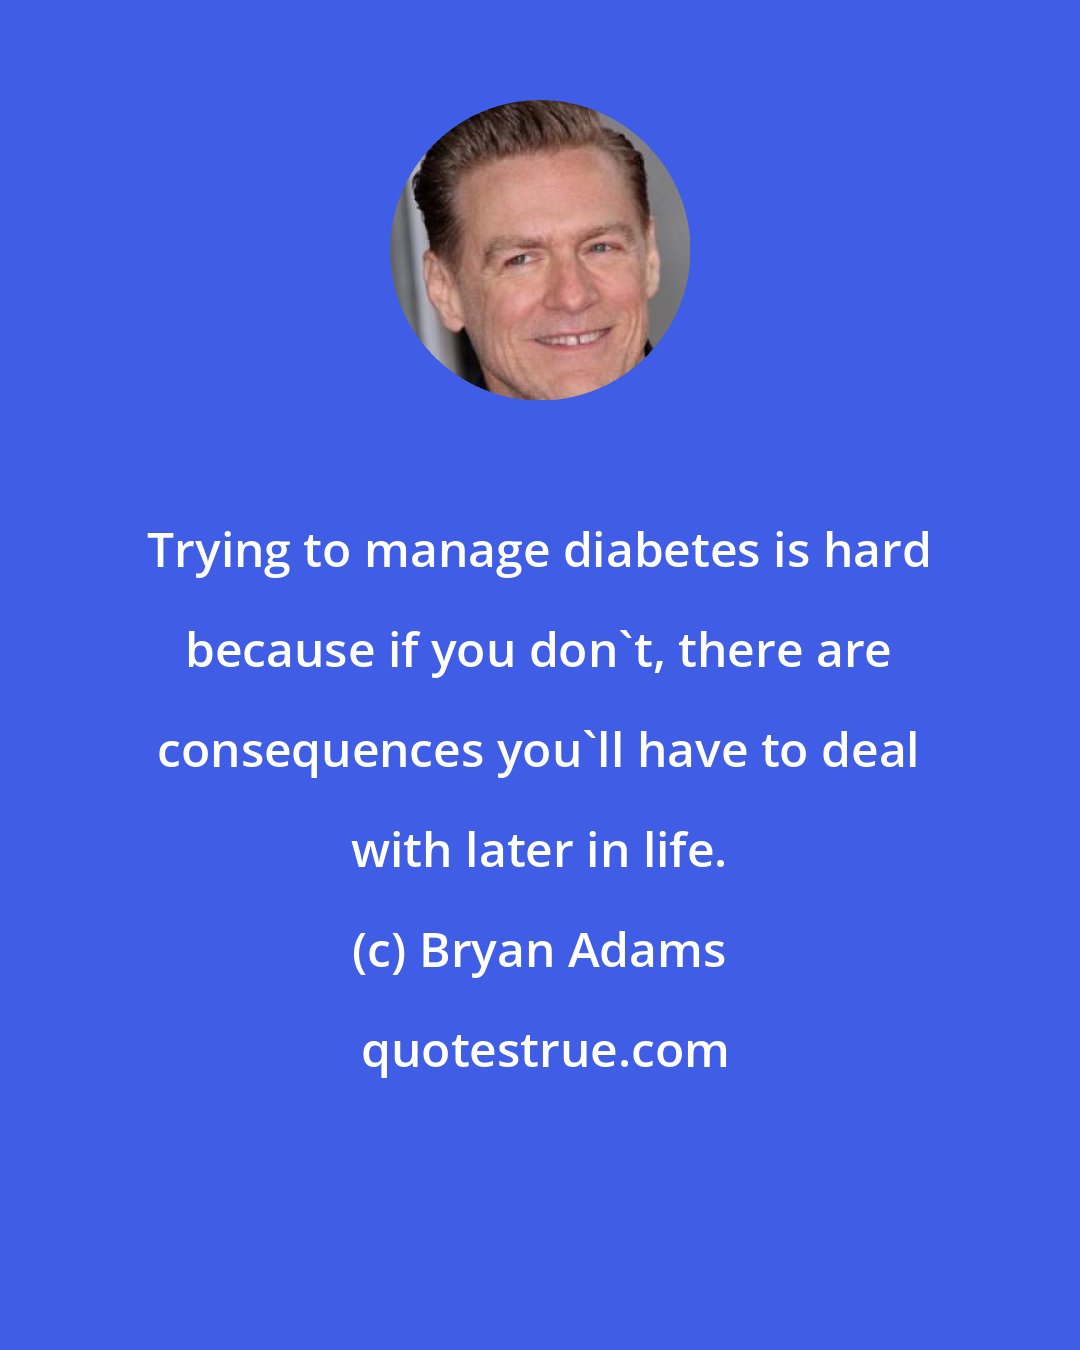 Bryan Adams: Trying to manage diabetes is hard because if you don't, there are consequences you'll have to deal with later in life.